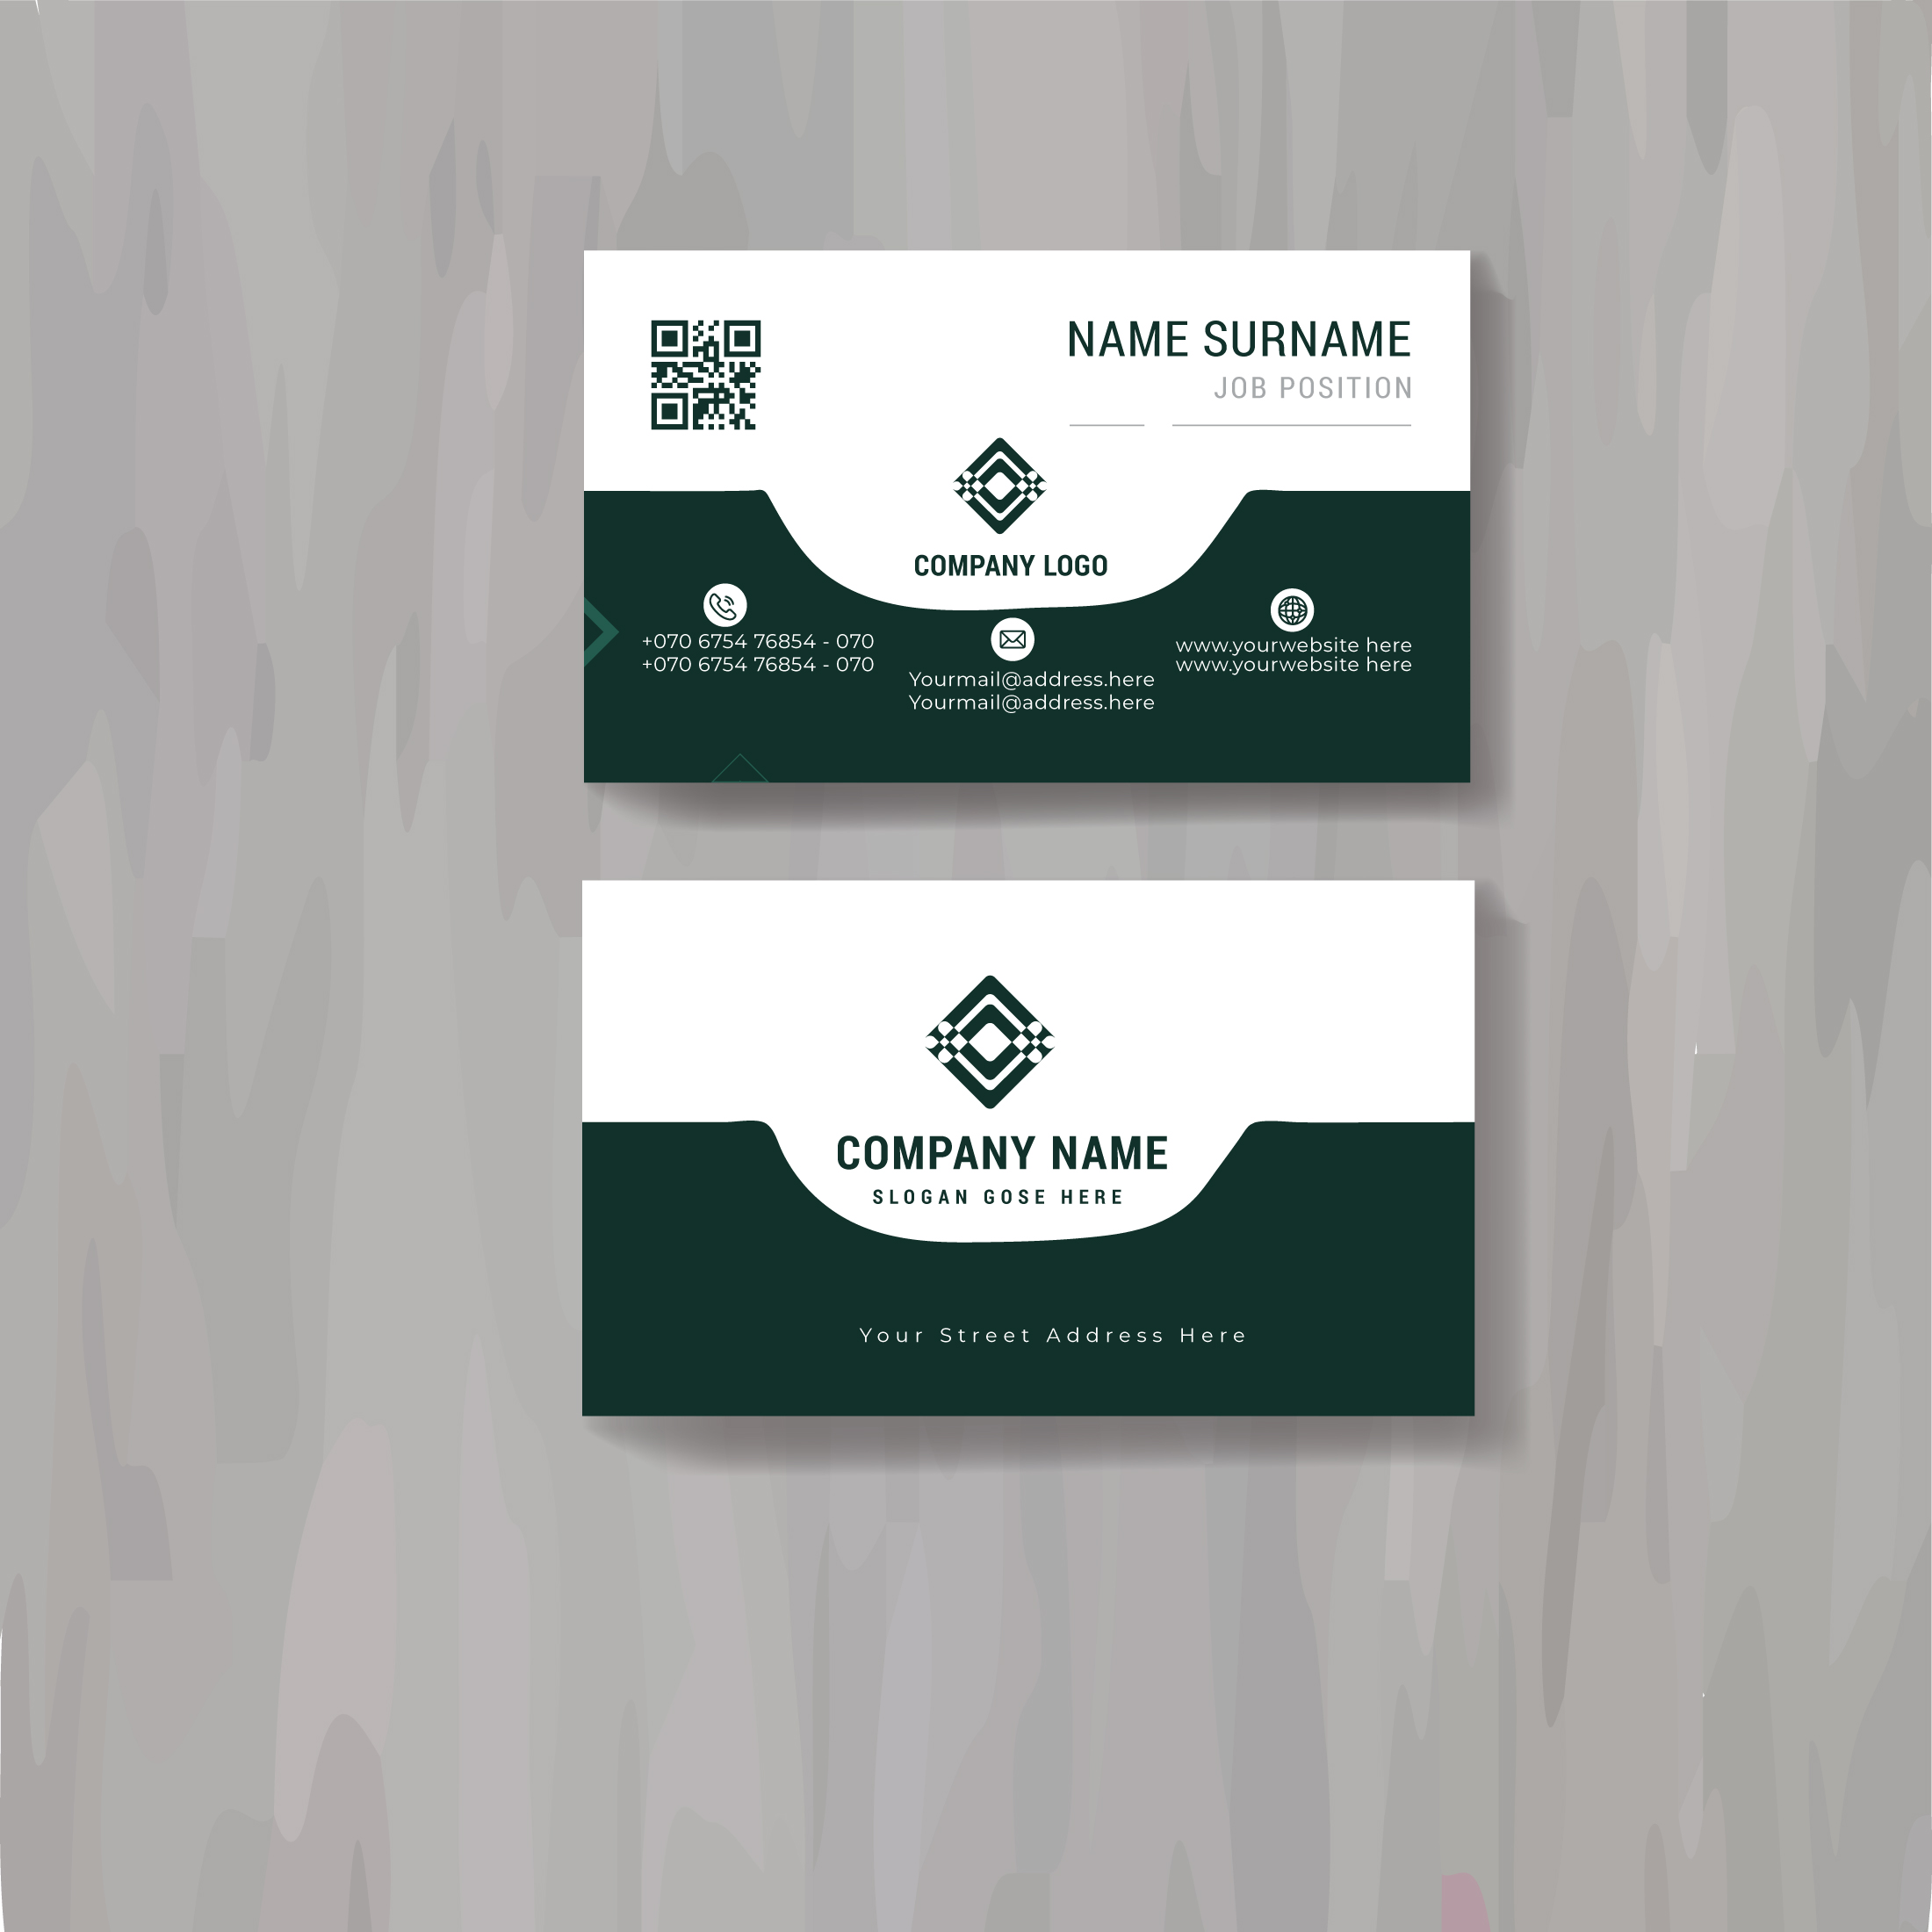 A business card with a green and white design.